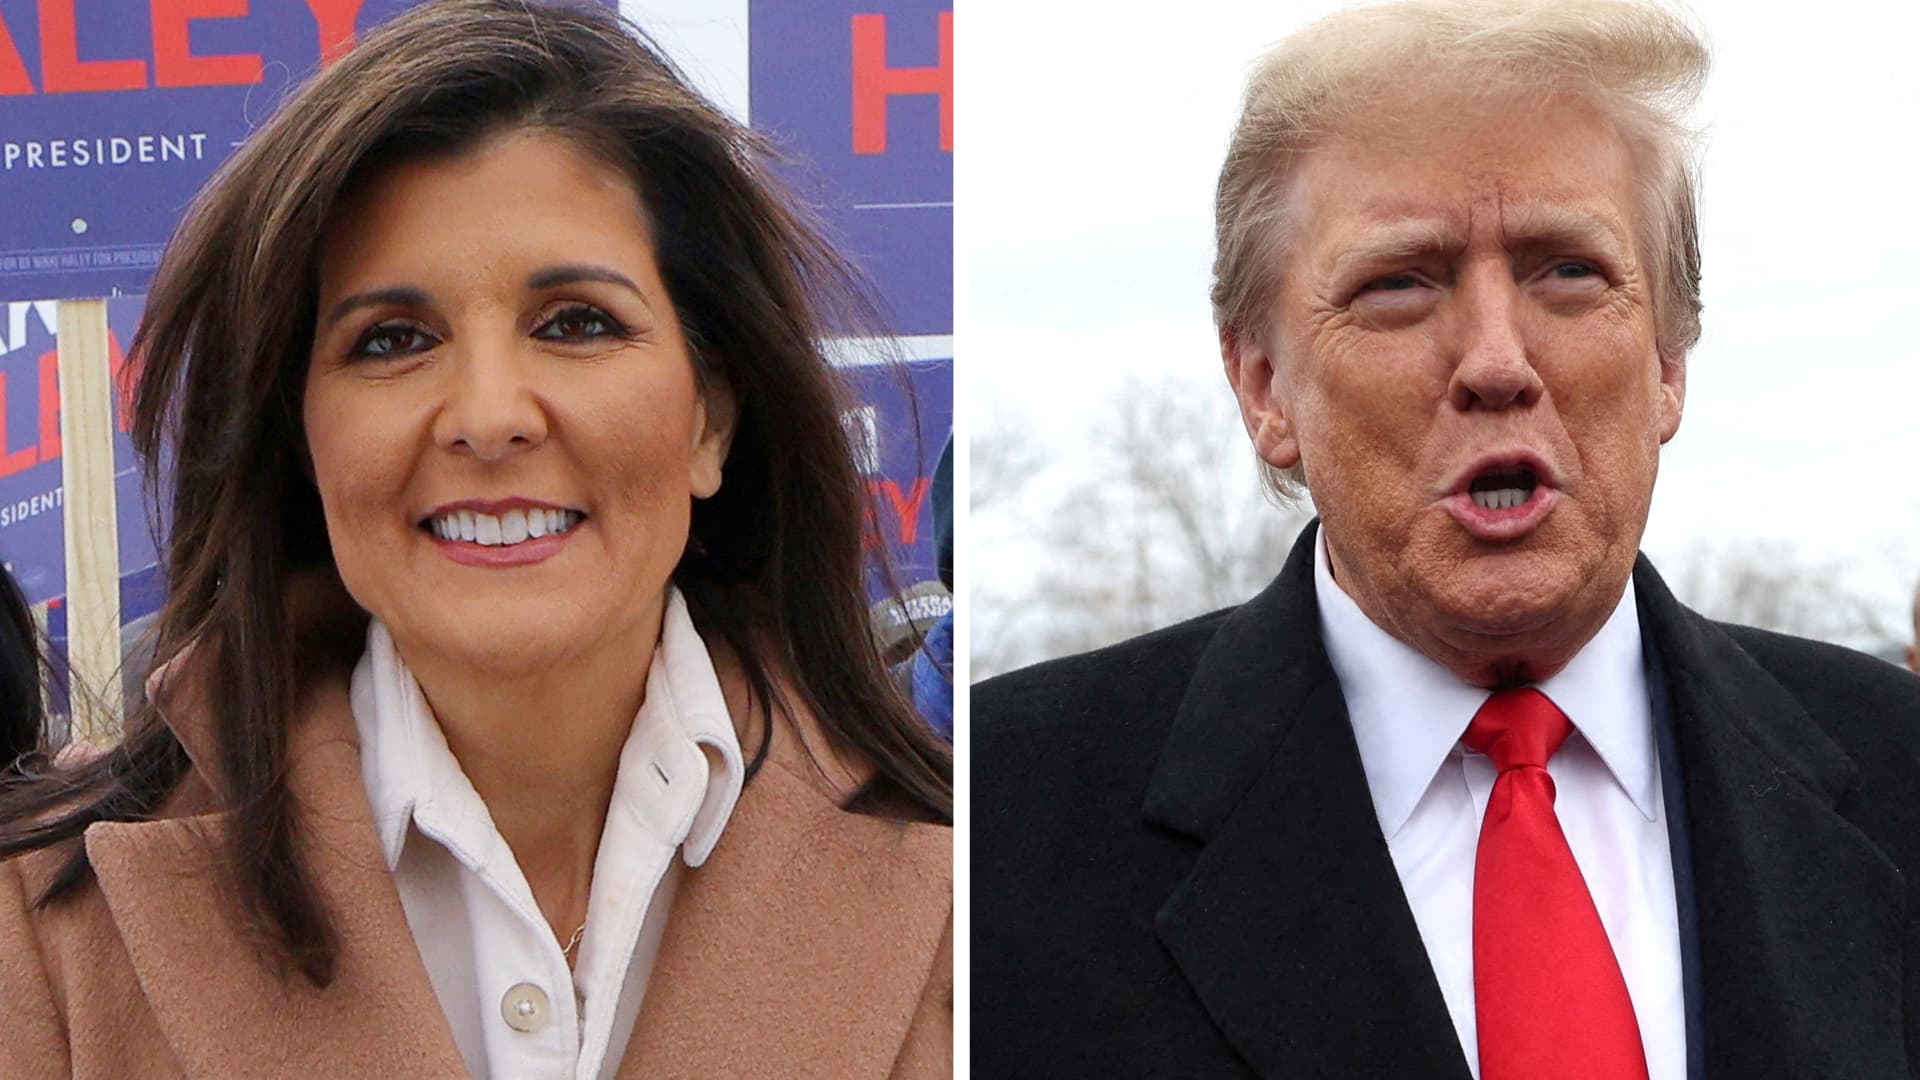 Donald Trump shuts down rumors about looking at Nikki Haley for vice president